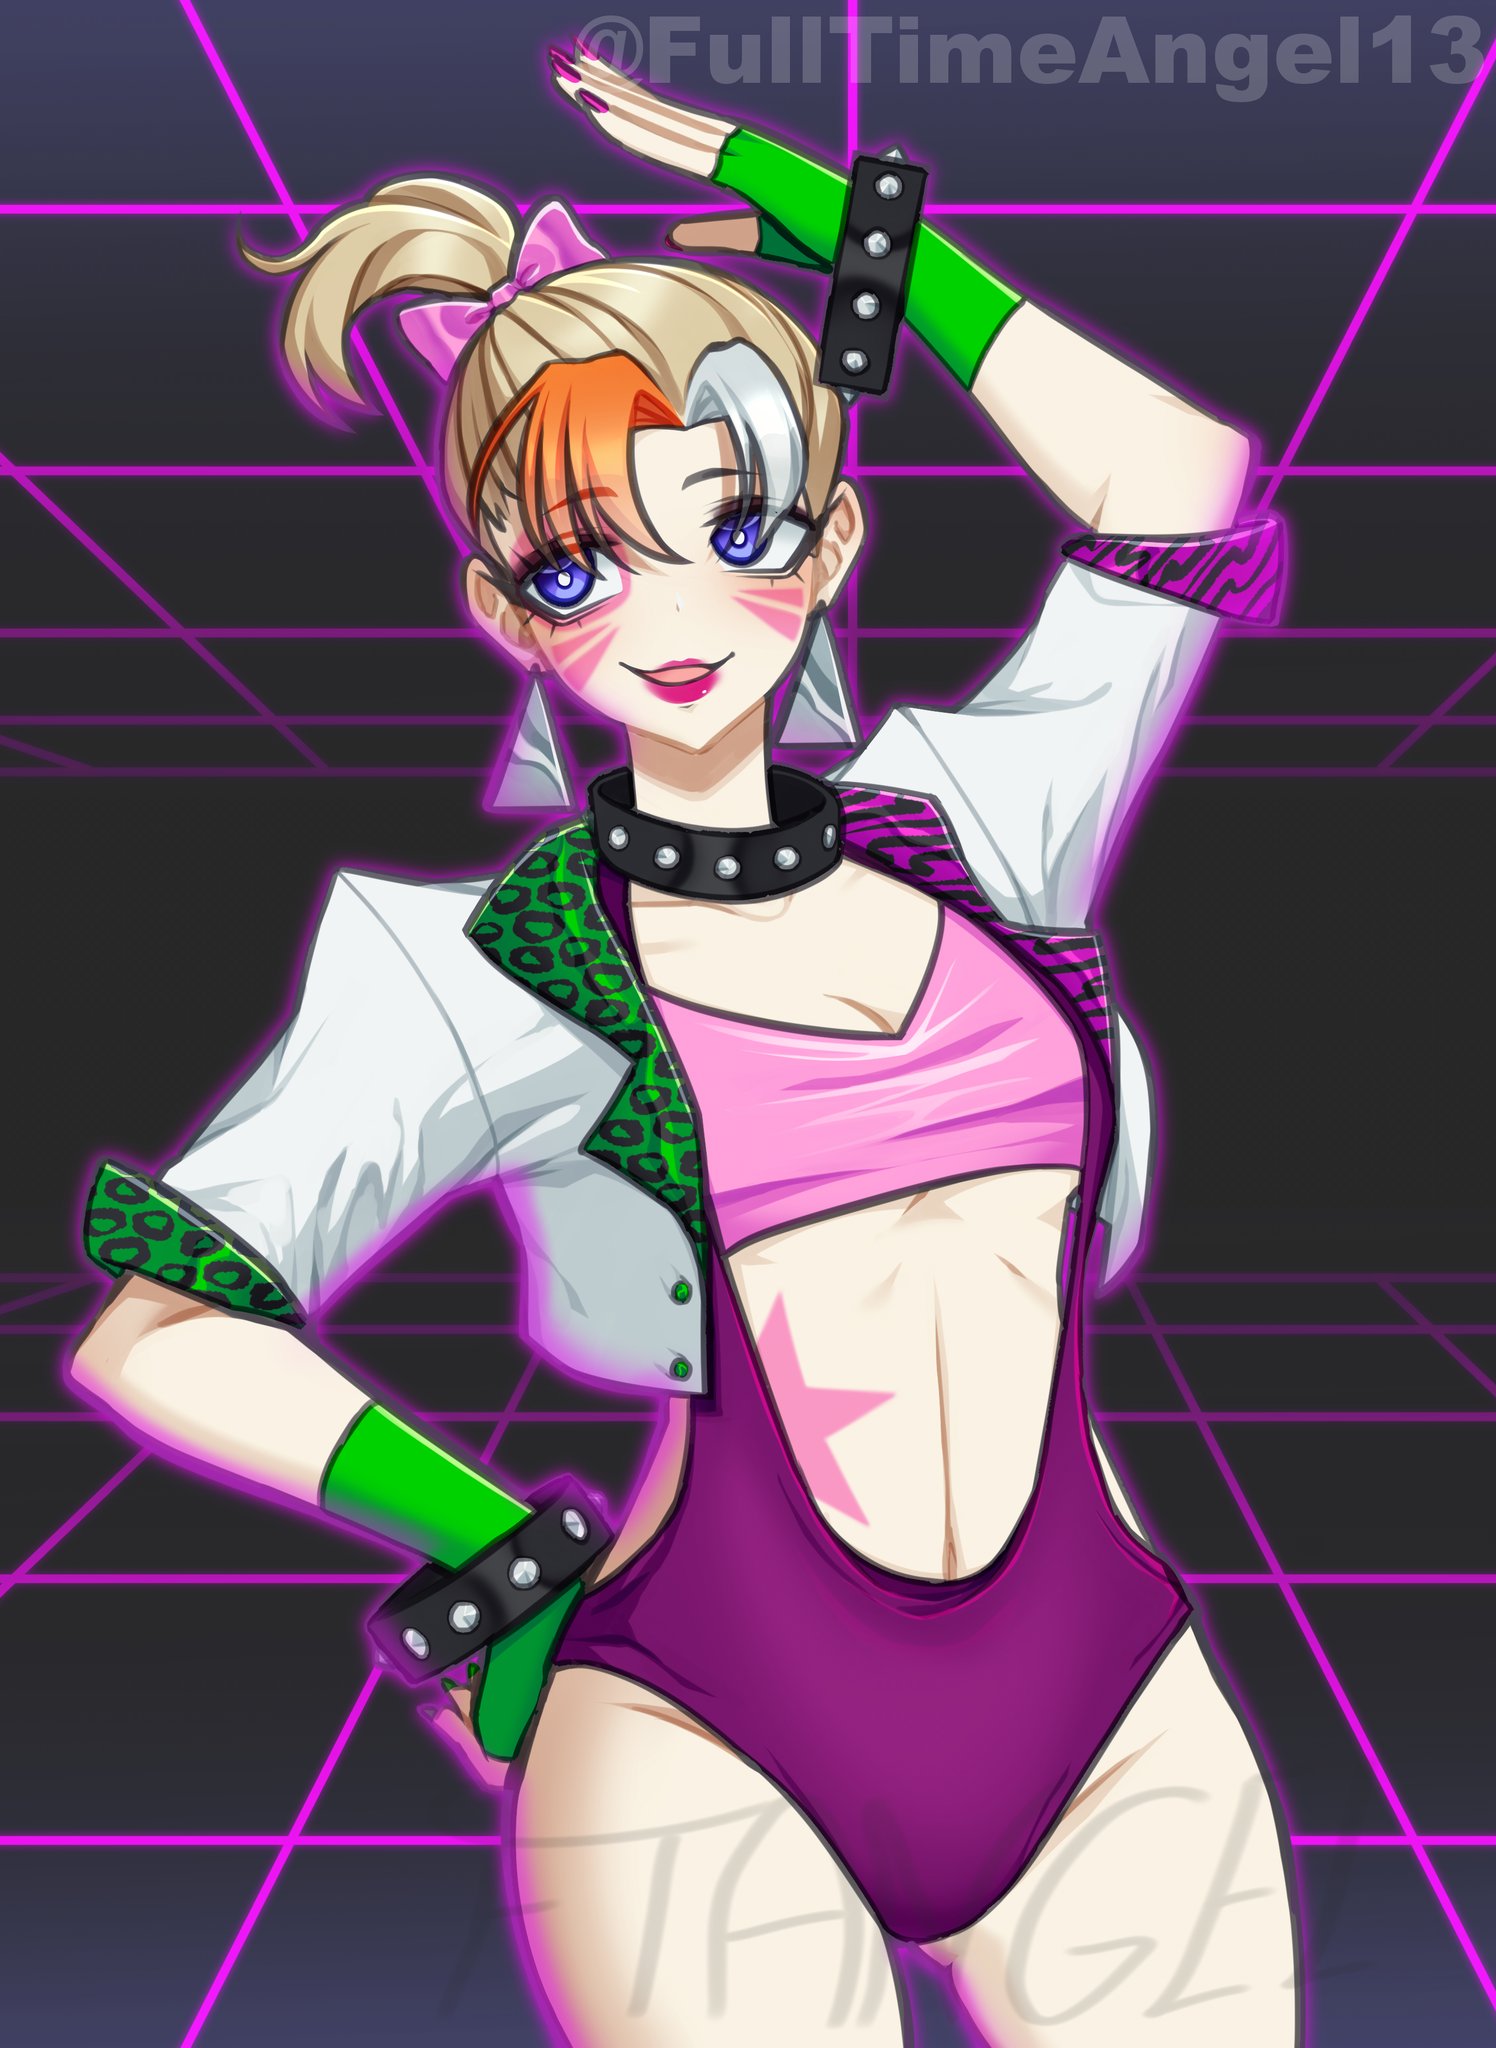 RefinedLight on X: Now that's the smell of fitness! - - #fnaf #fnafsb  #fnafsecuritybreach #fnafsecuritybreachfanart #securitybreach  #glamrockchica  / X